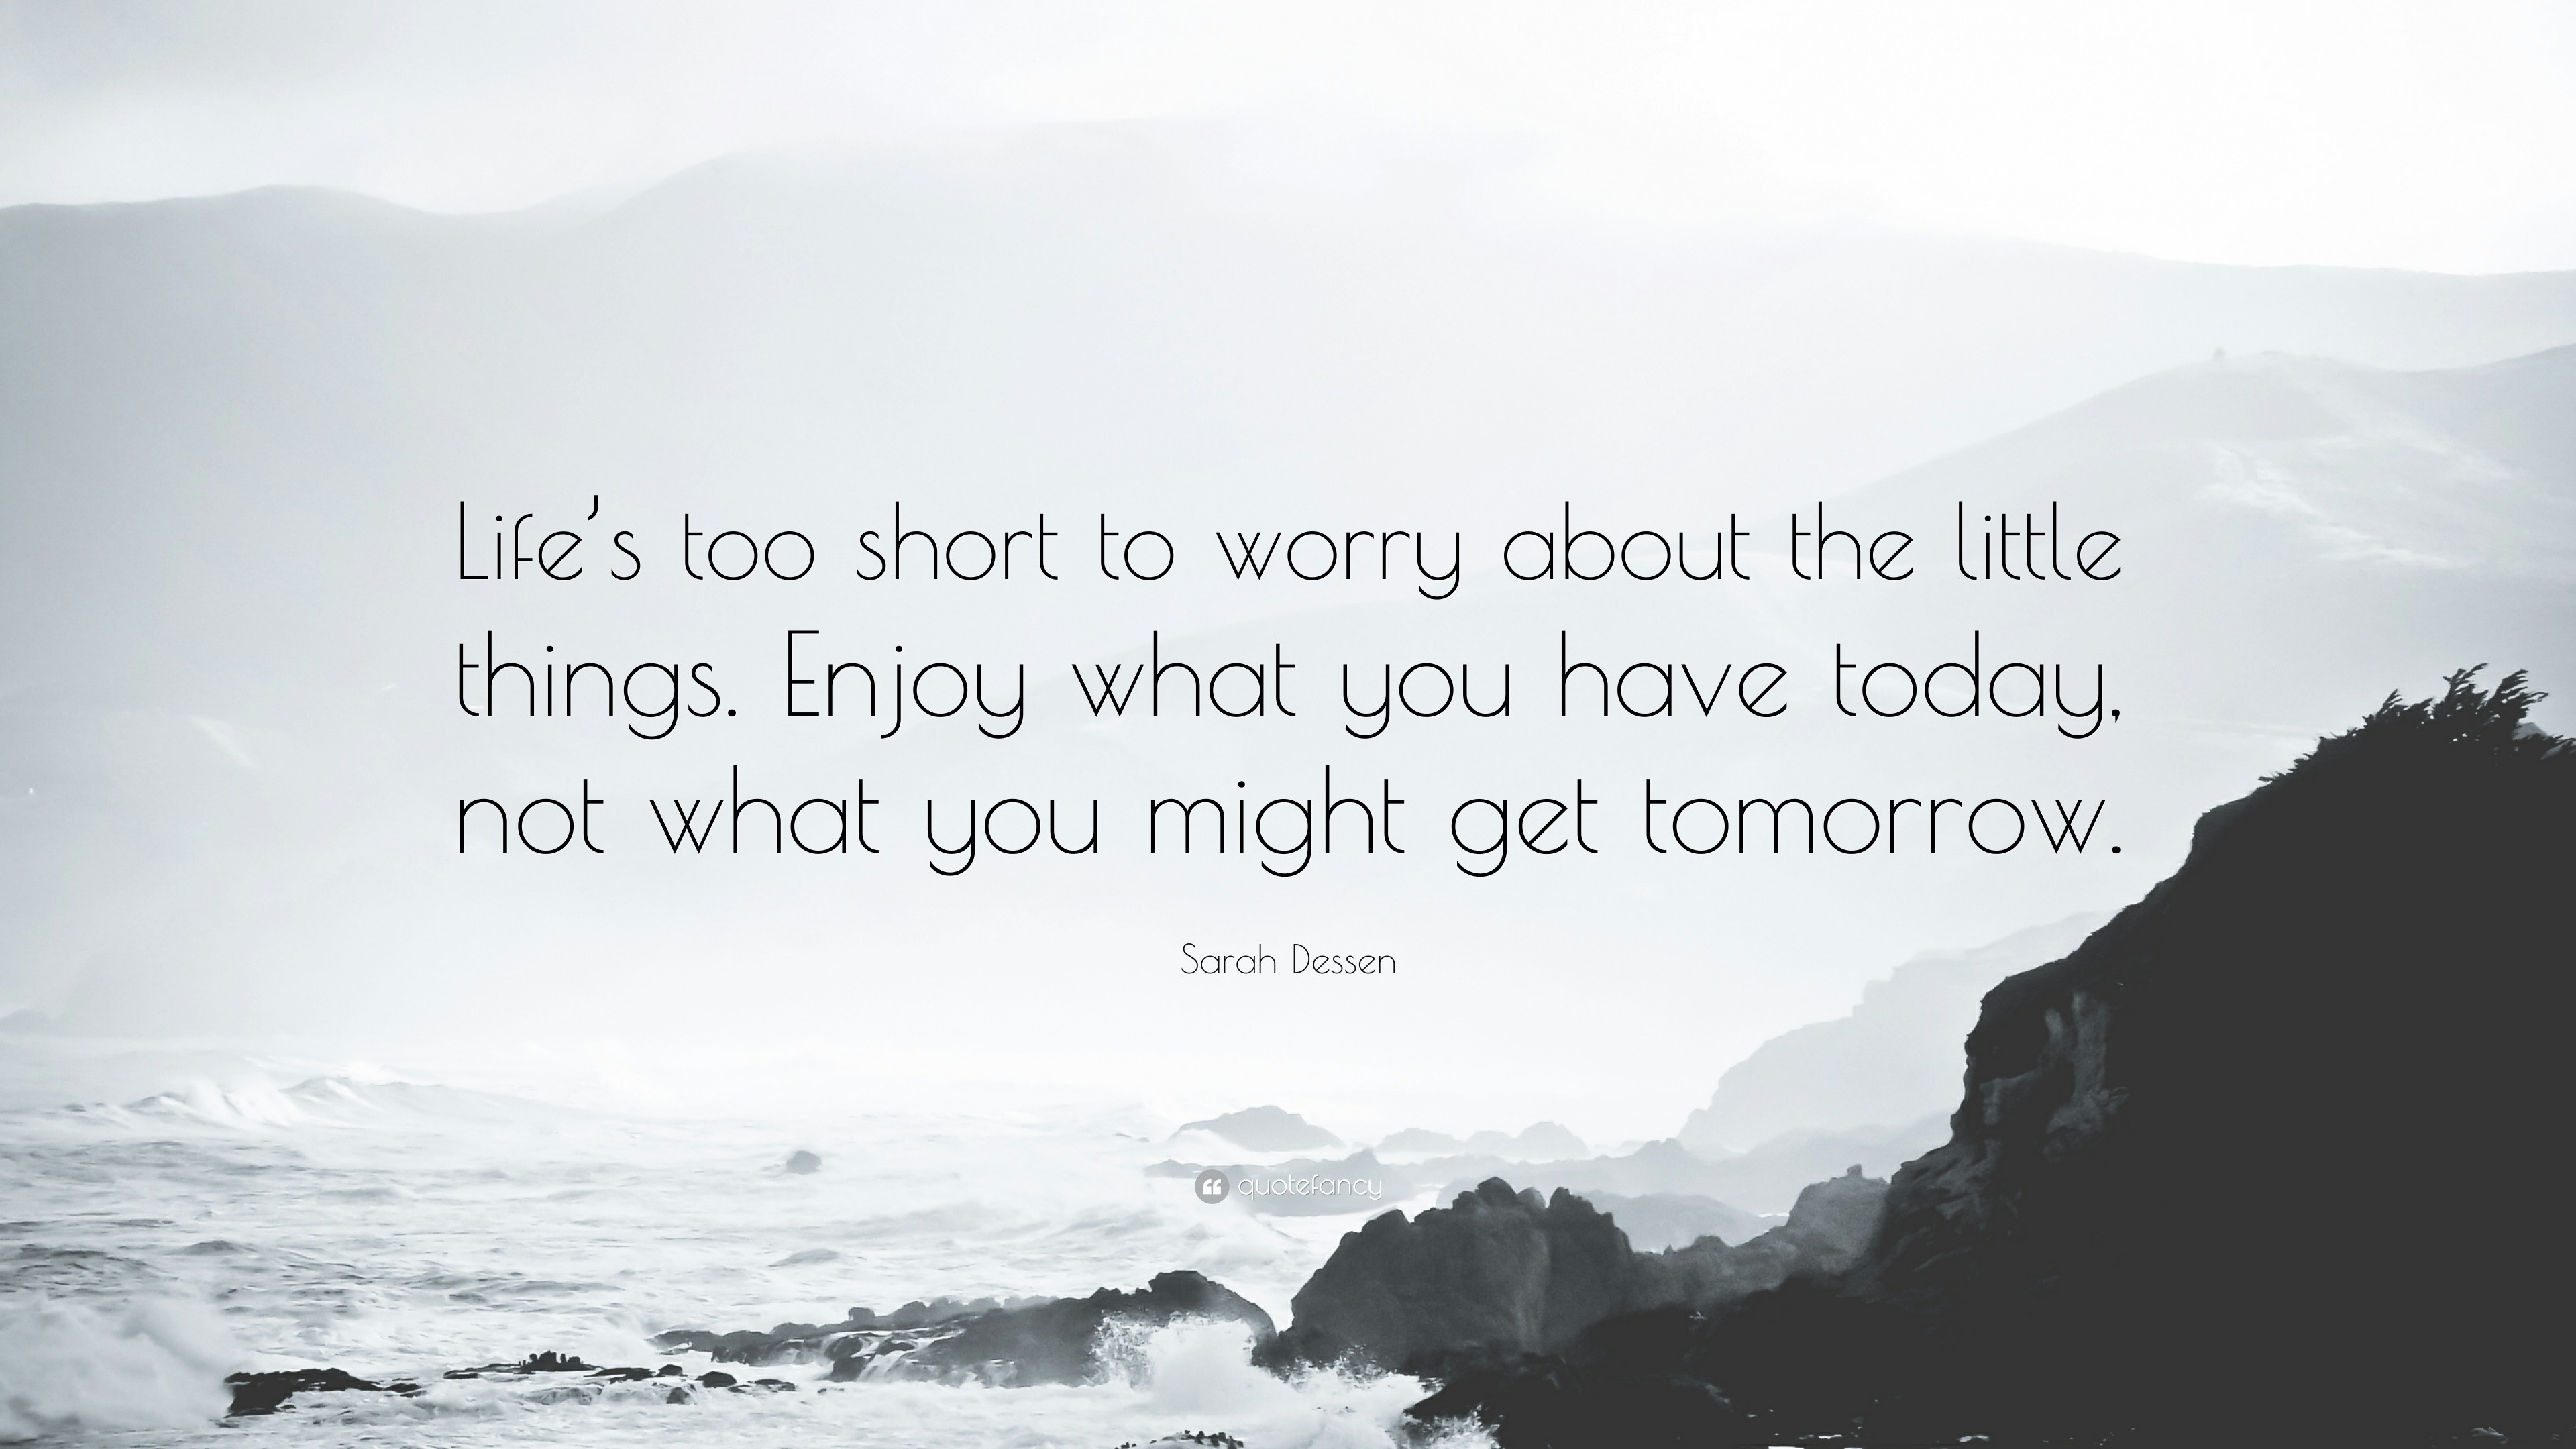 Sarah Dessen Quote “Life s too short to worry about the little things Enjoy